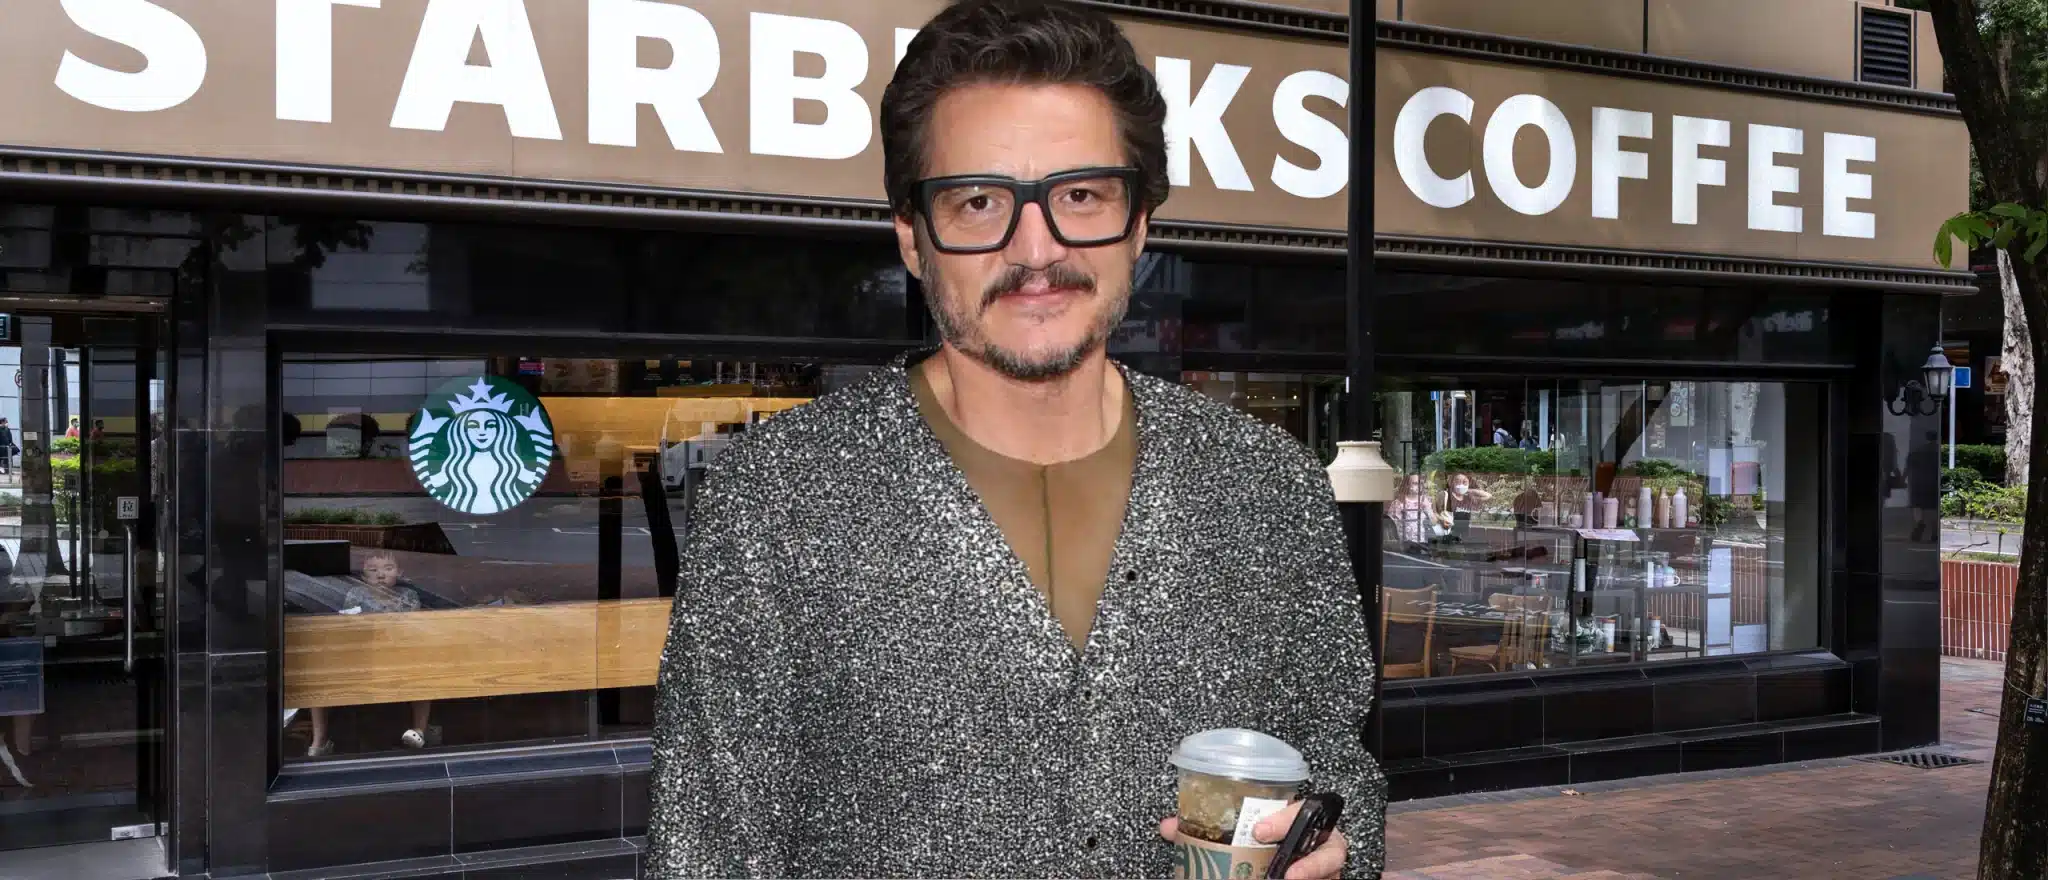 Pedro Pascal’s Insane Coffee Order Could Have This Impact on Your T